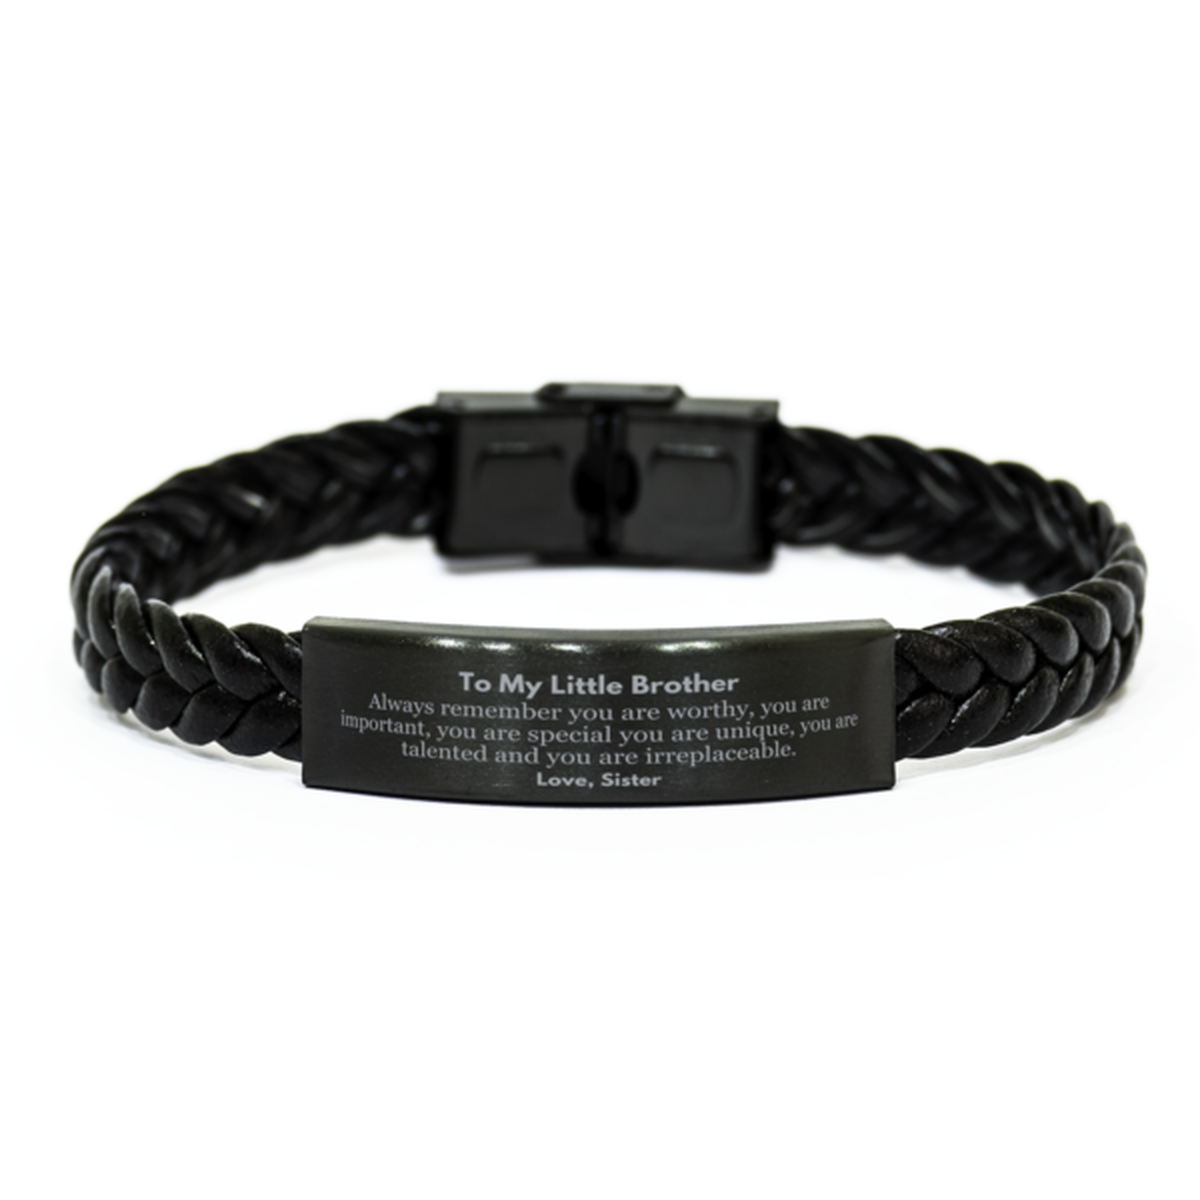 Little Brother Birthday Gifts from Sister, Inspirational Braided Leather Bracelet for Little Brother Christmas Graduation Gifts for Little Brother Always remember you are worthy, you are important. Love, Sister